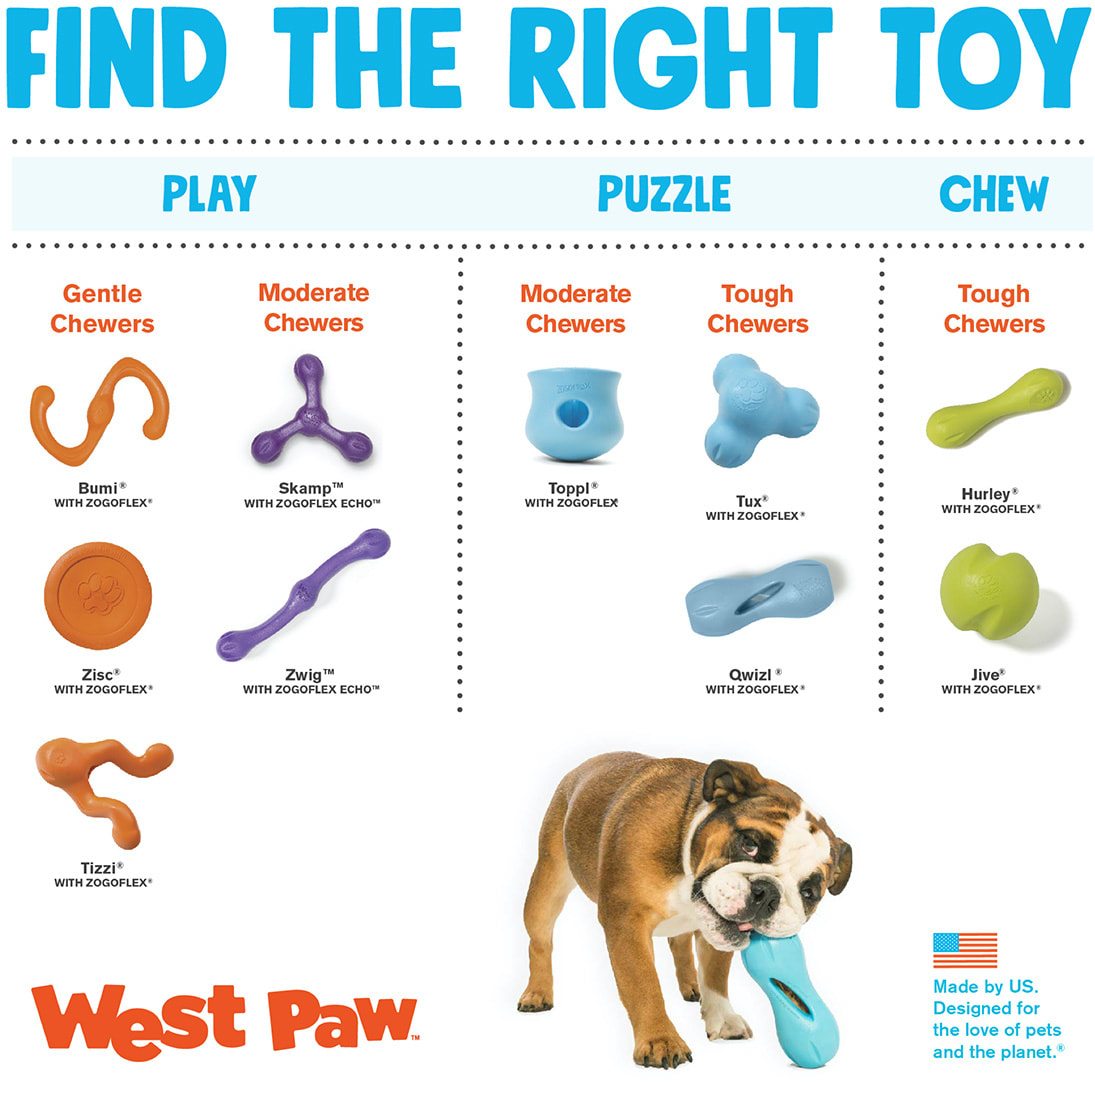 https://assets.petco.com/petco/image/upload/f_auto,q_auto/west-paw-find-the-right-toy-062920-brand-shop-img-1095w-1120h-d